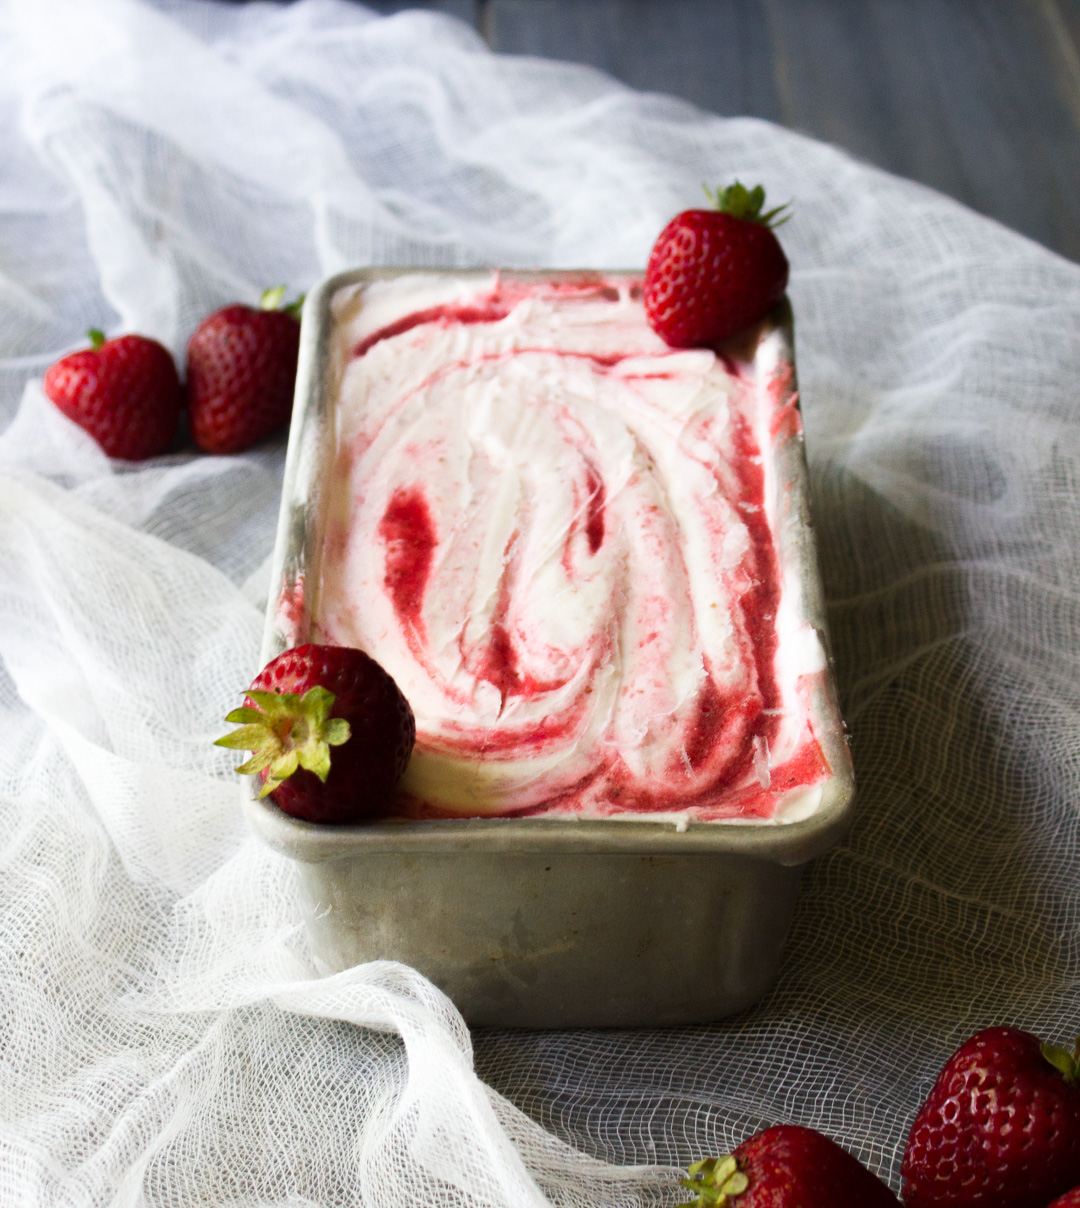 Easy 3 Ingredient No-Churn Strawberry Ice Cream is a sweet way to enjoy those beautiful, fresh berries!